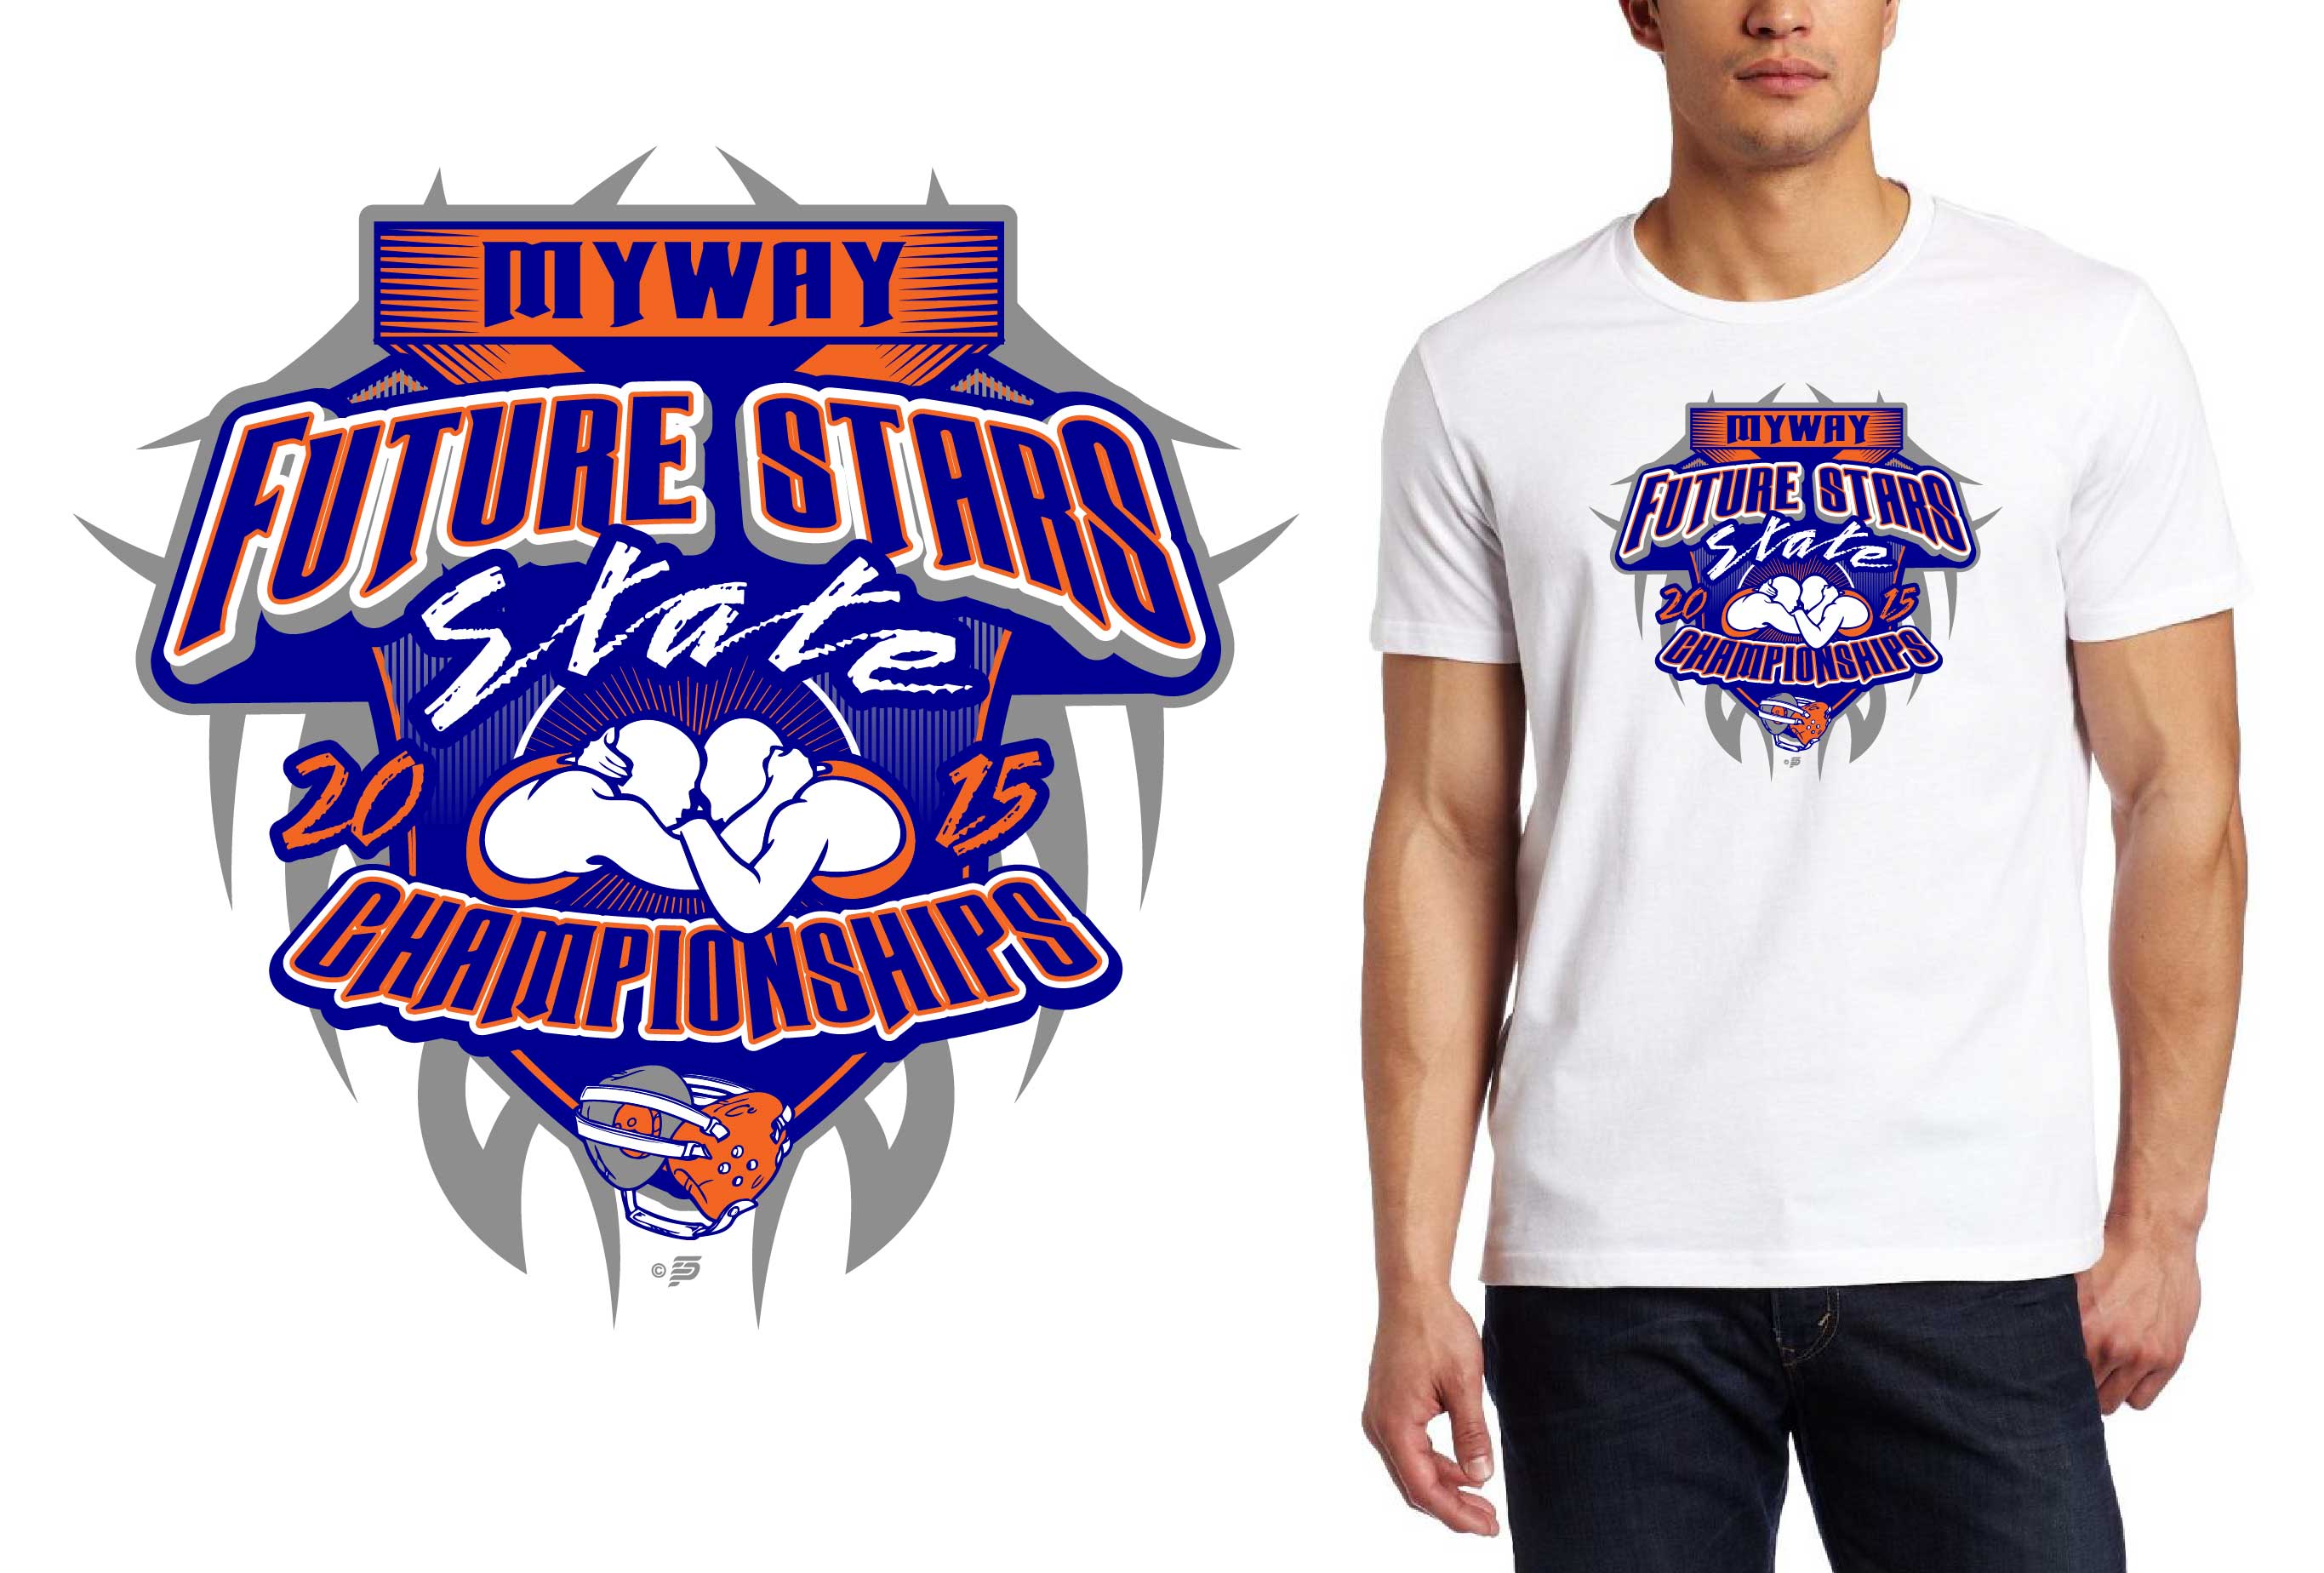 Cool Wrestling Logo - MYWAY Future Stars State Championships cool wrestling logo